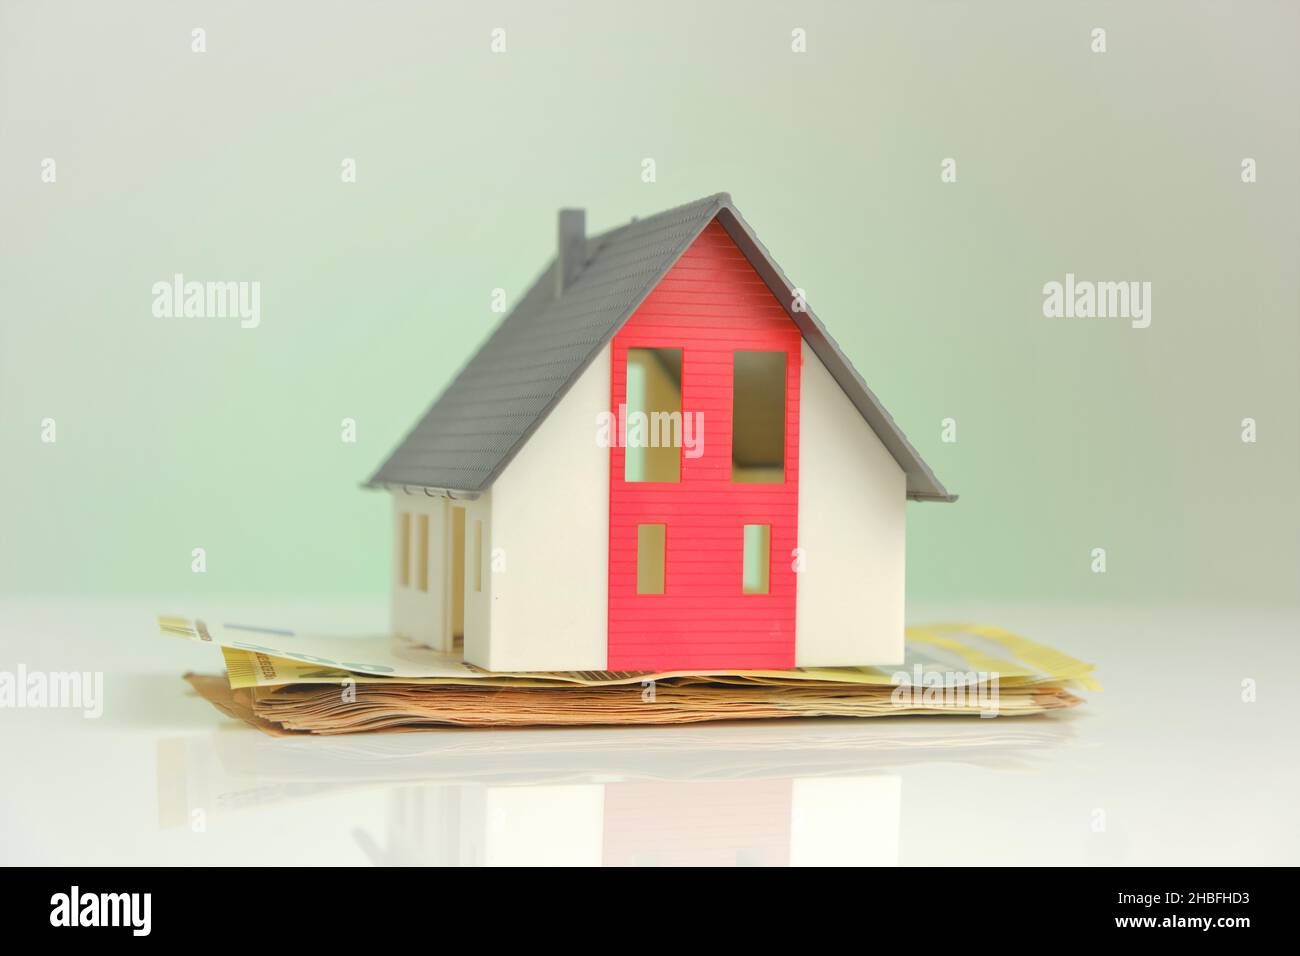 Buying and building a house.House and money. Mock house with roof on euro banknotes background. Real estate market. Real estate loan. Stock Photo